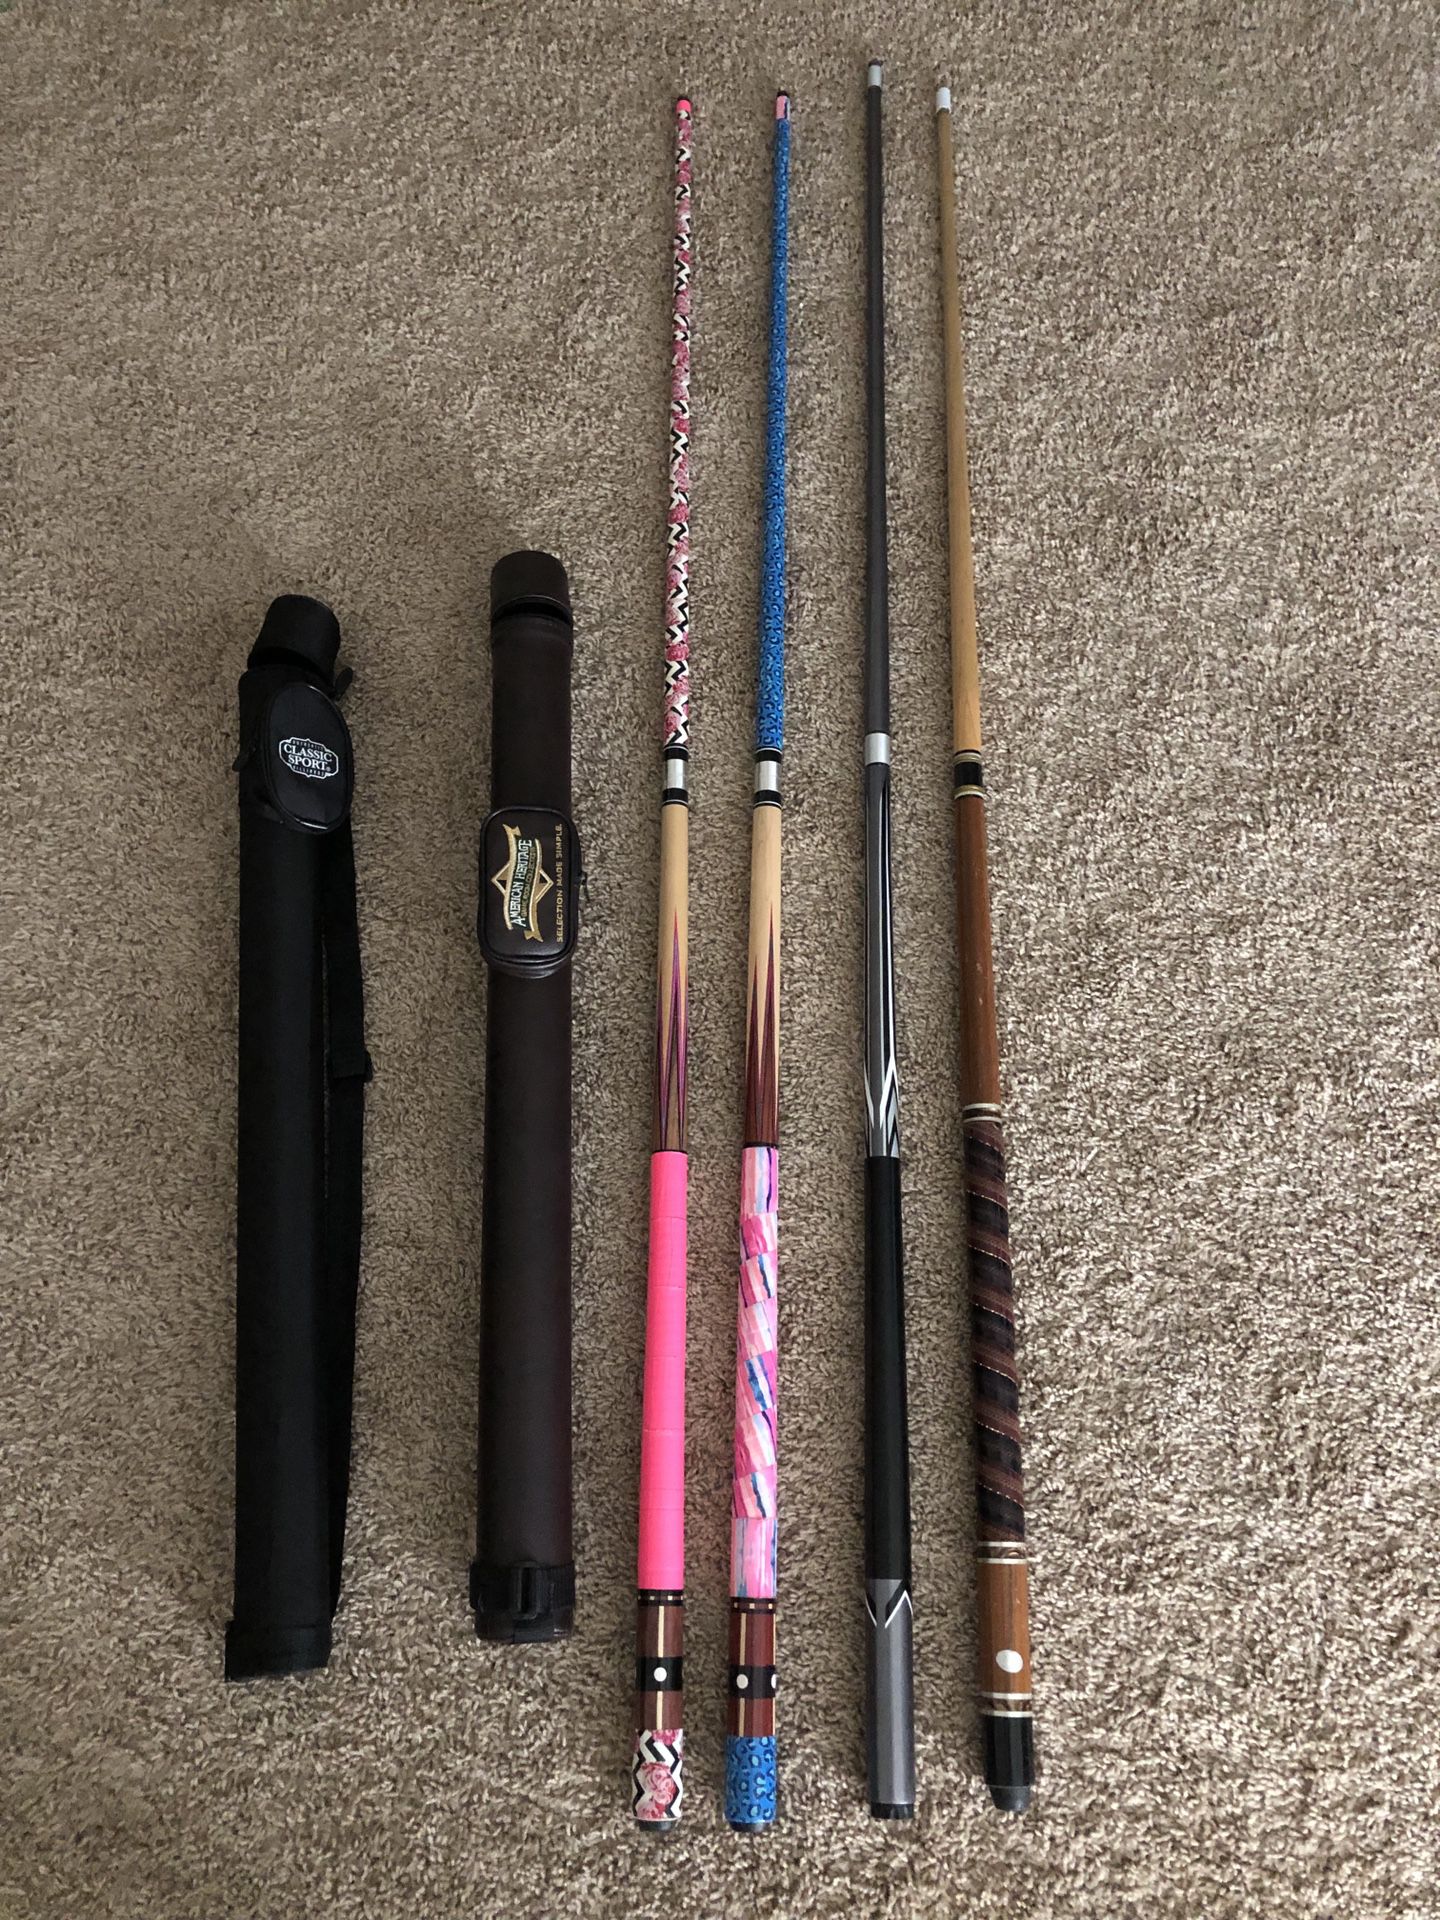 Pool sticks and cases